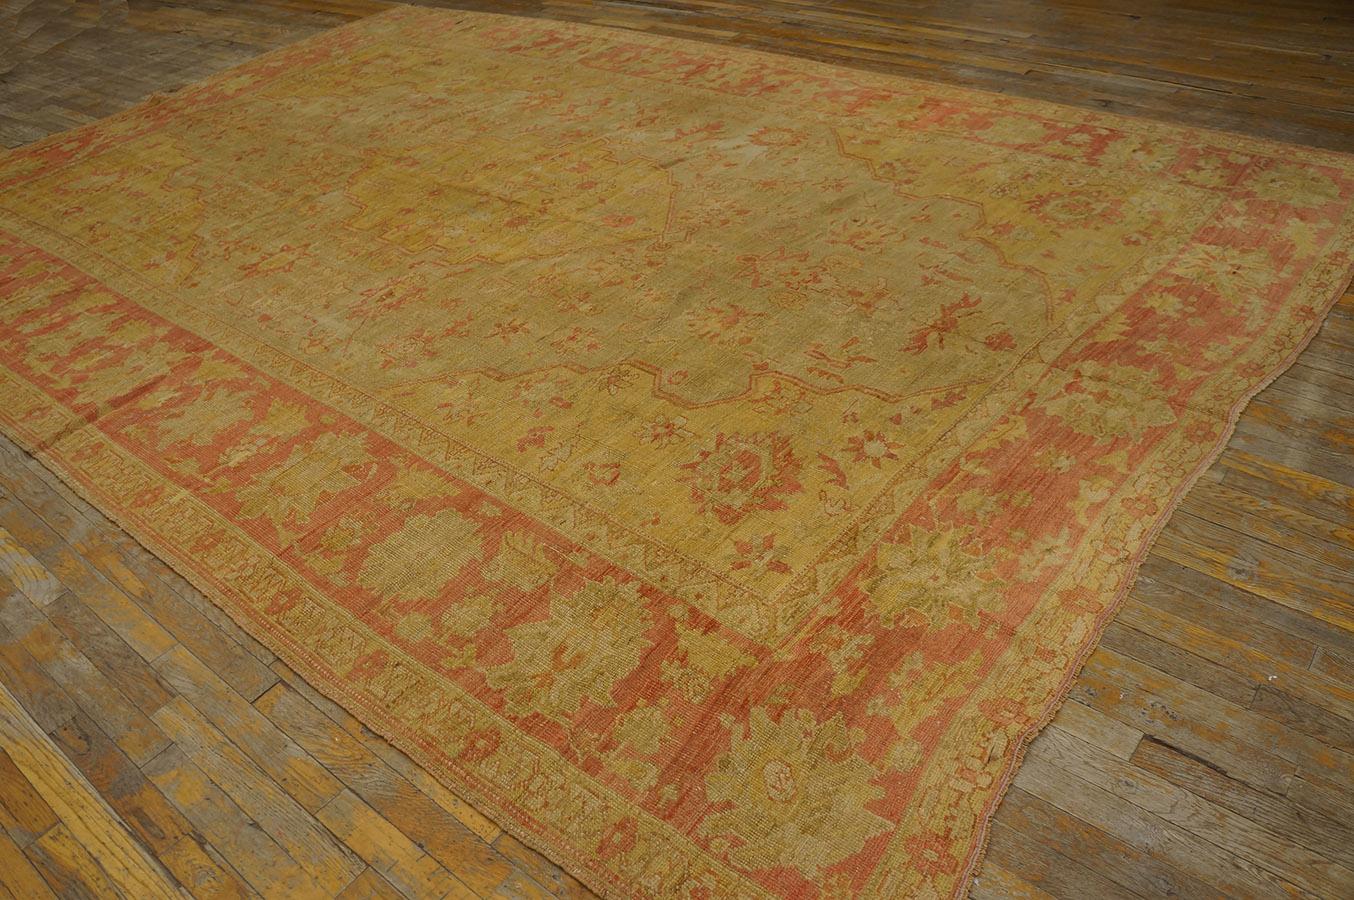 19th Century Turkish Oushak Carpet ( 9'2'' x 13'8'' - 280 x 416 ) In Good Condition For Sale In New York, NY